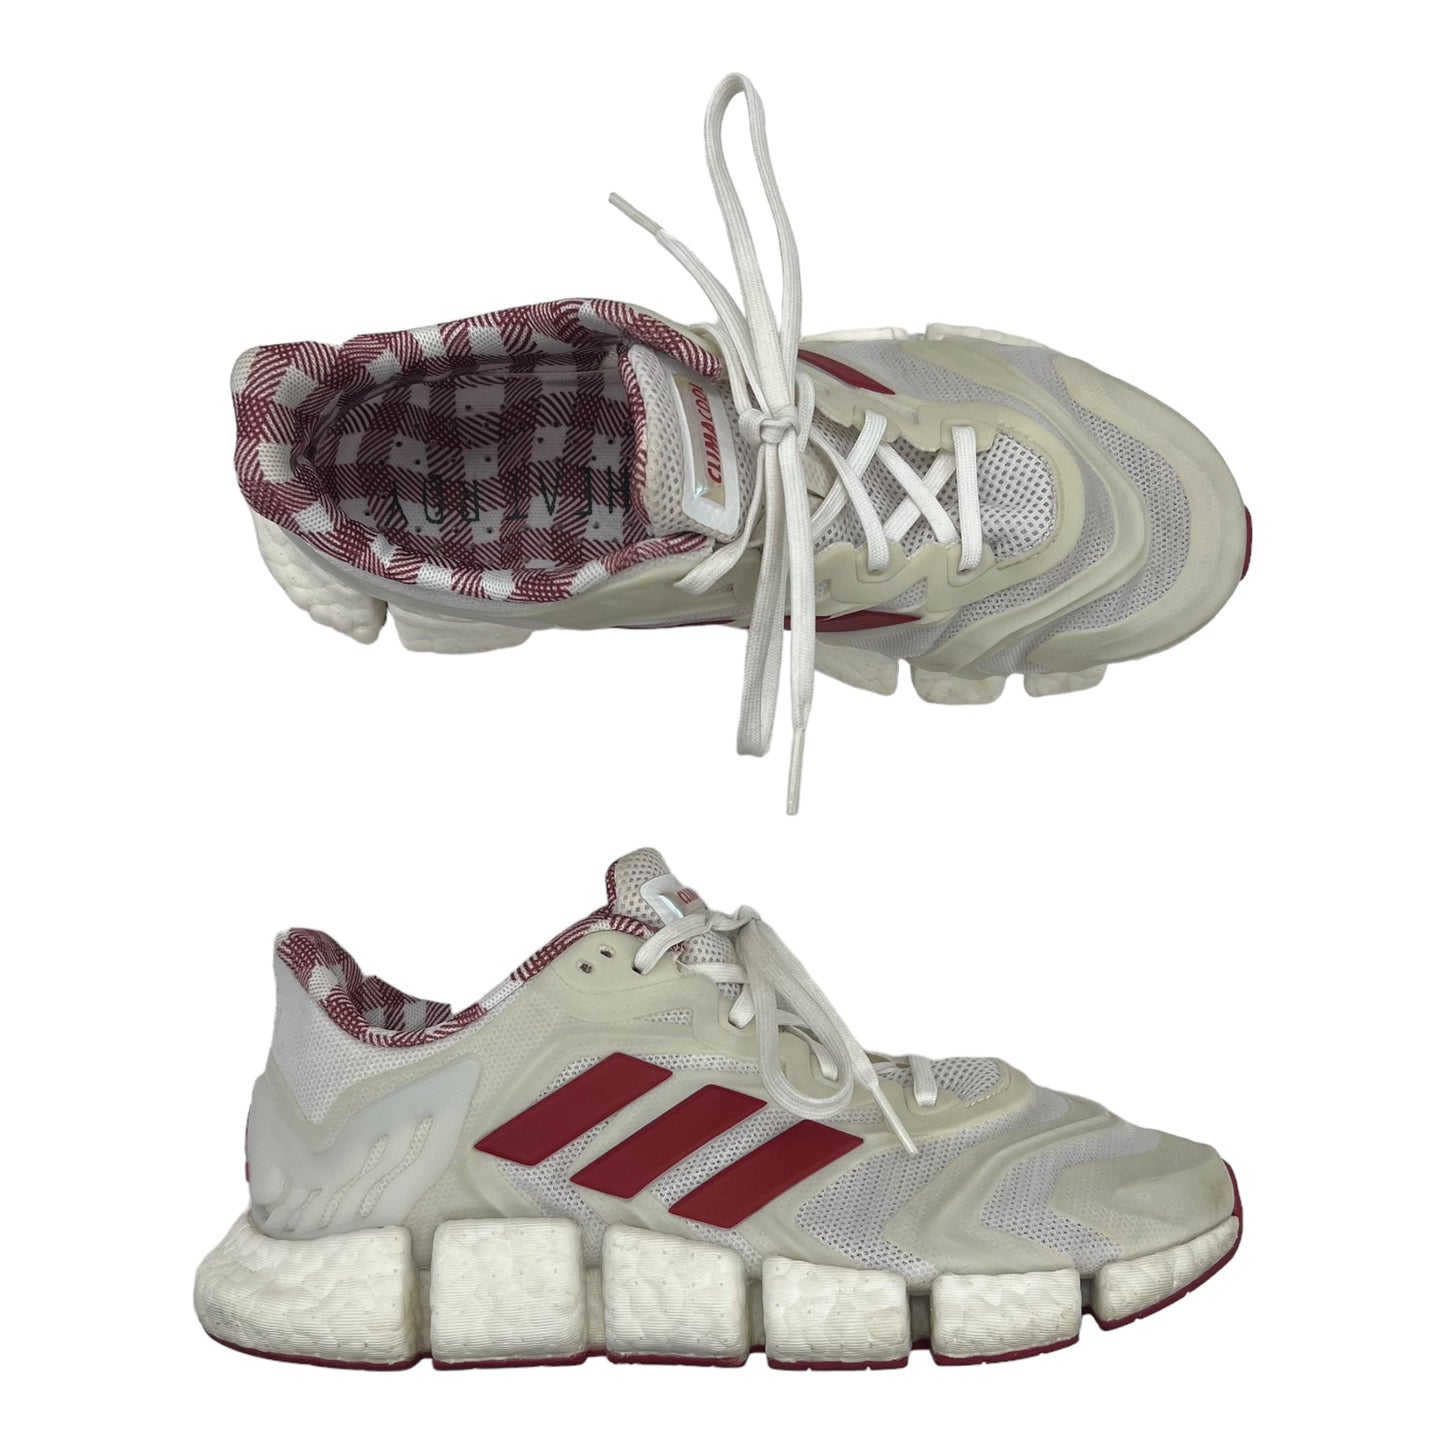 CREAM & RED ADIDAS SHOES ATHLETIC, Size 7.5